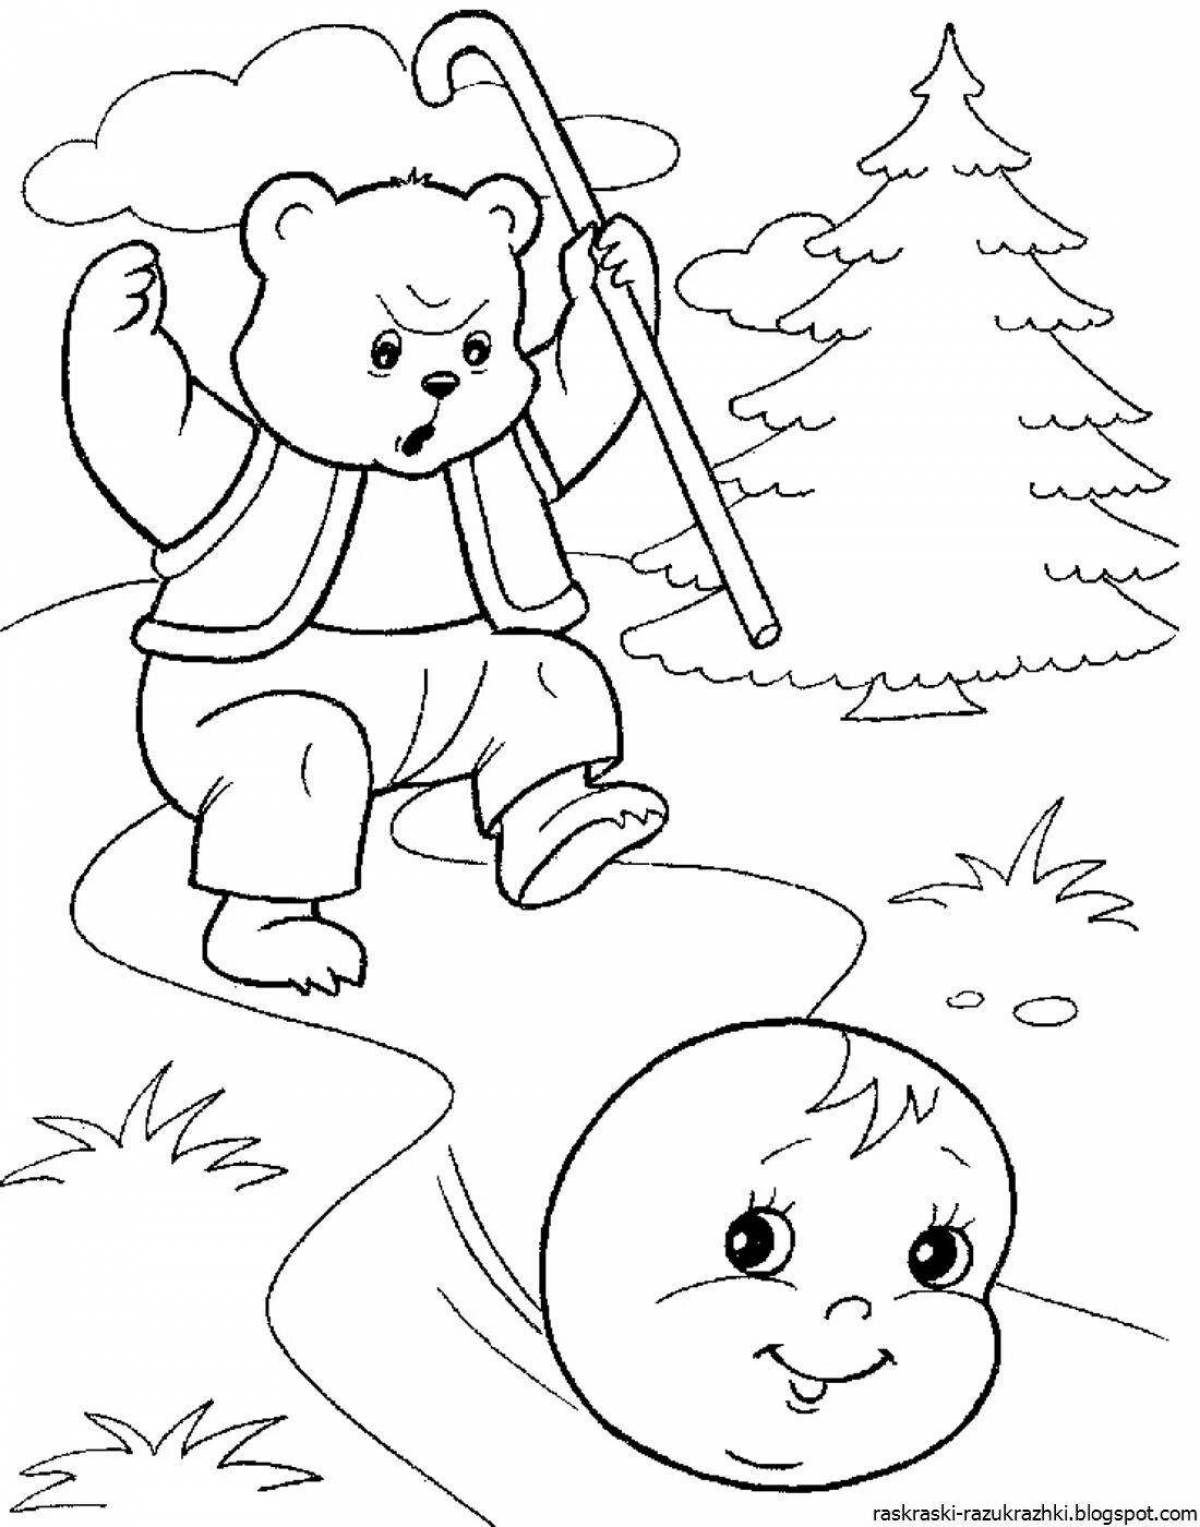 Amazing bun coloring page for kids